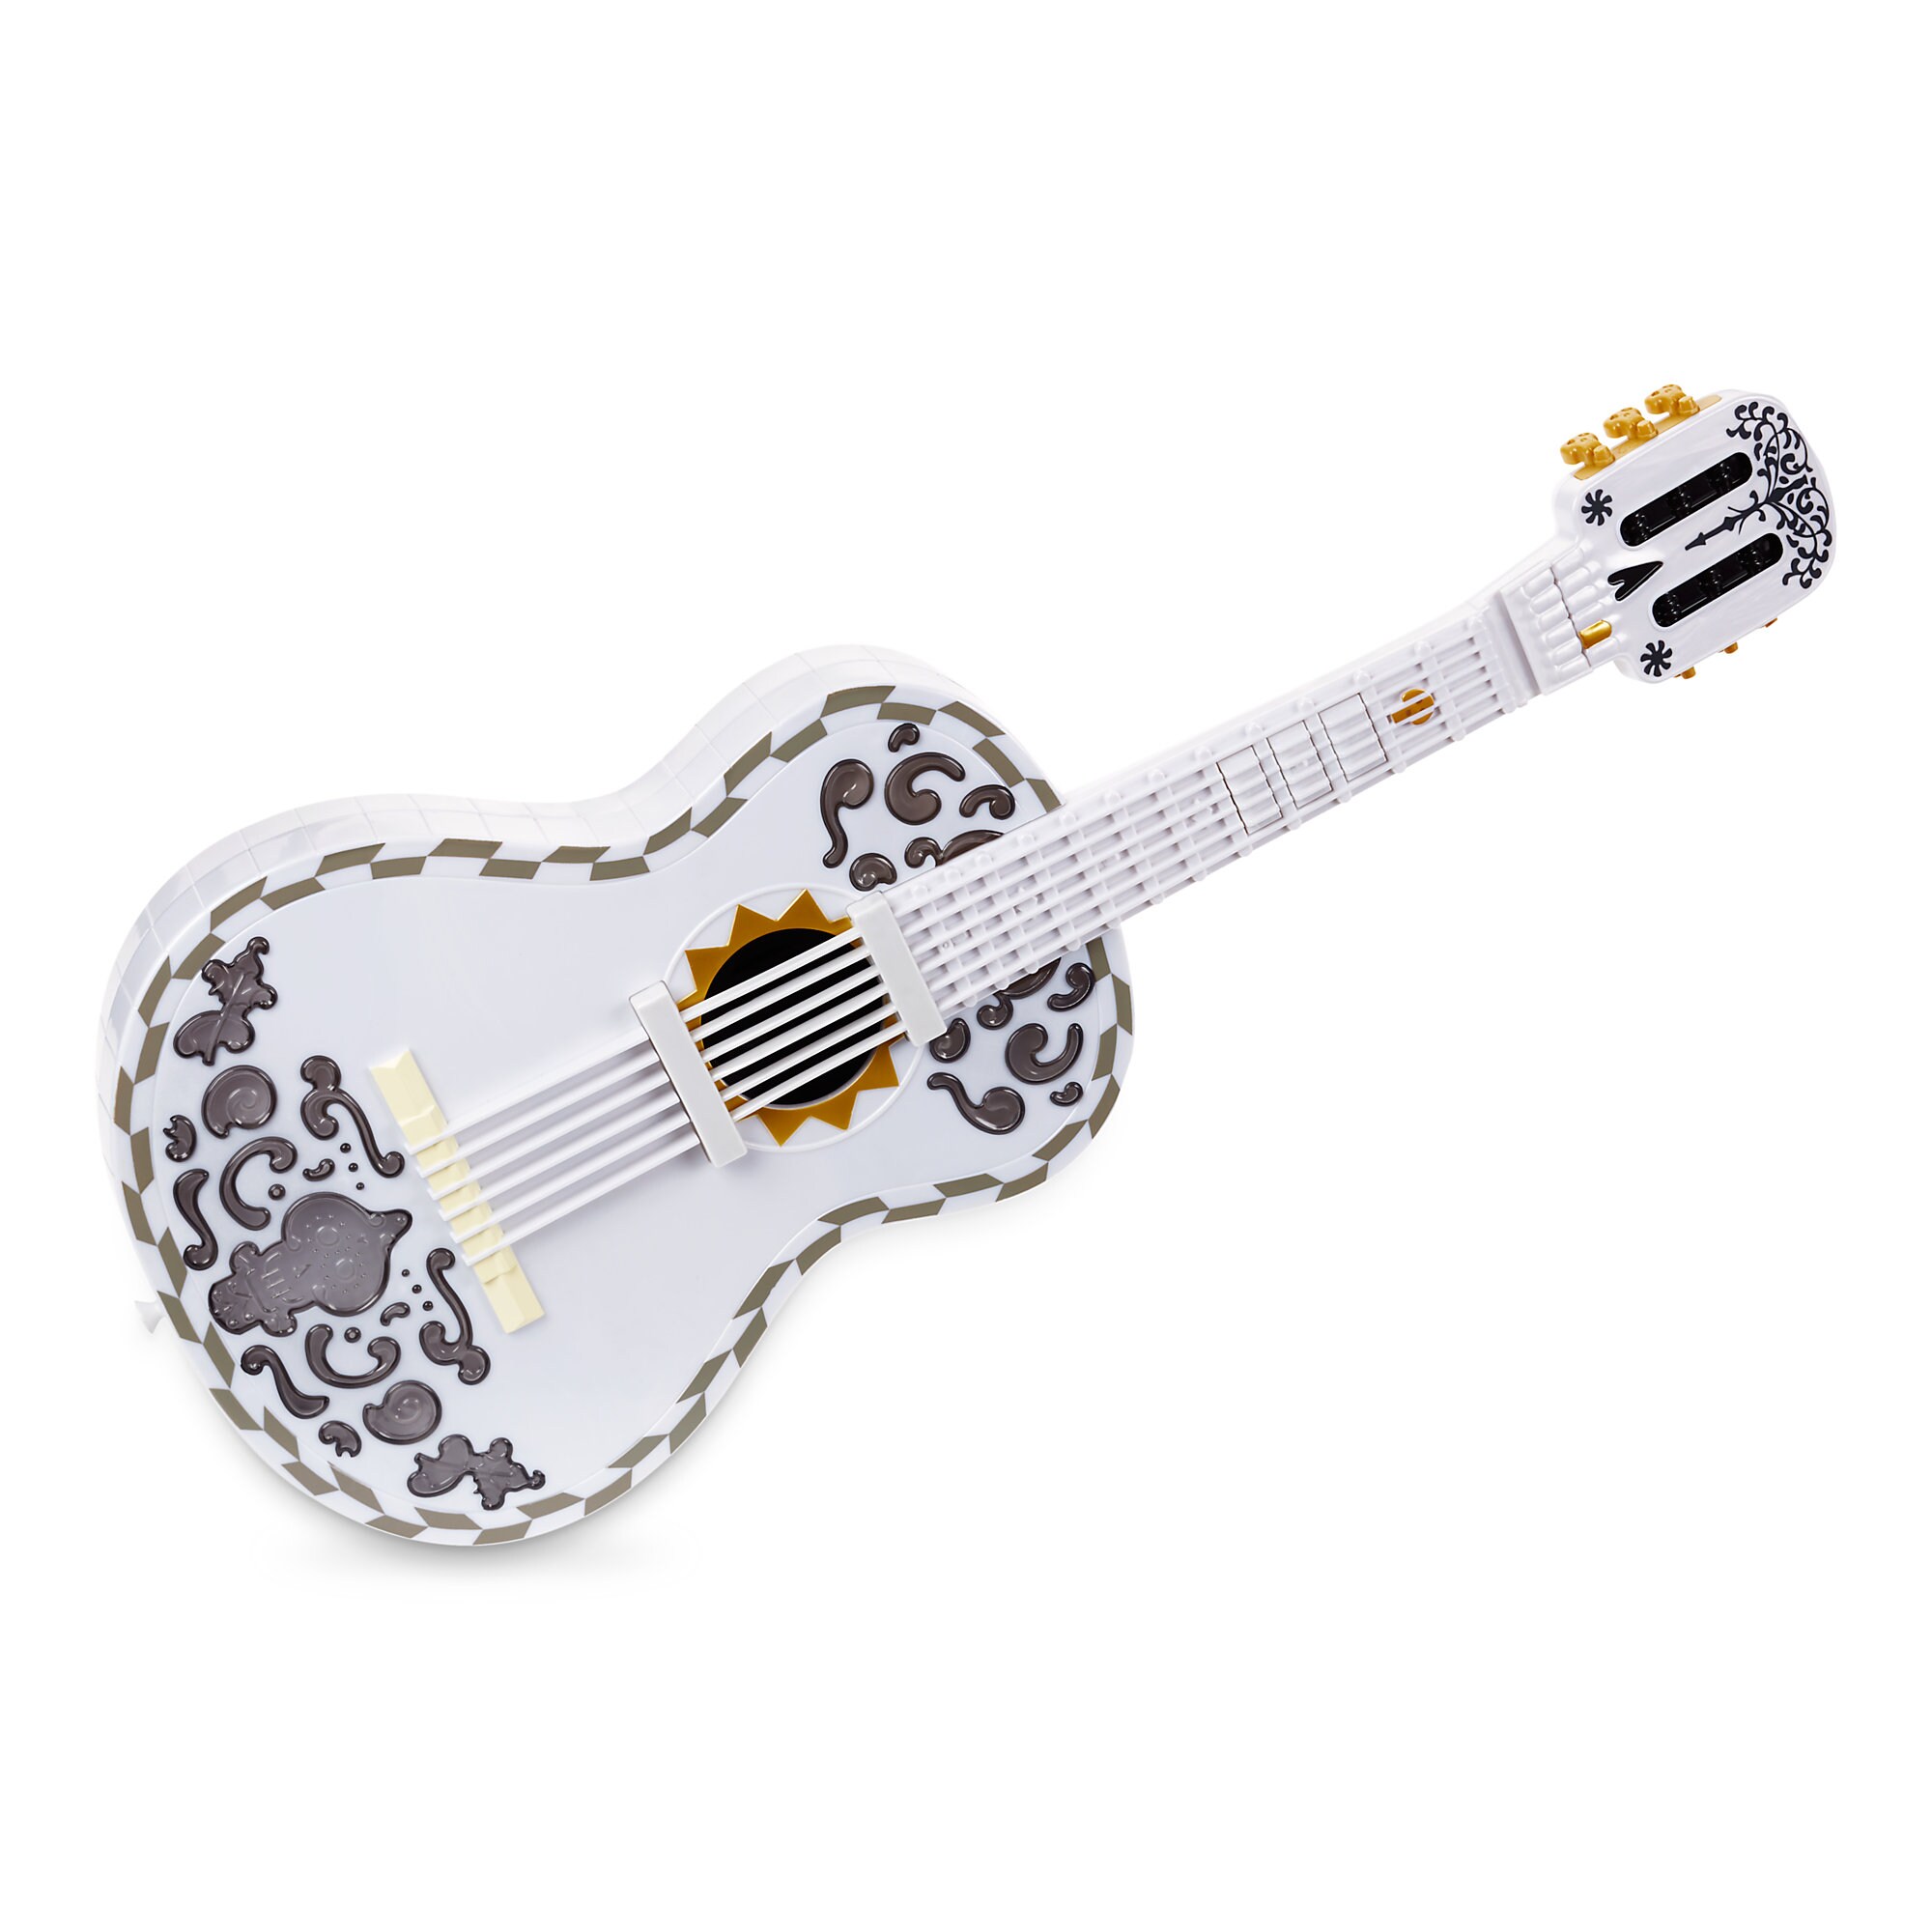 Coco Interactive Guitar by Mattel